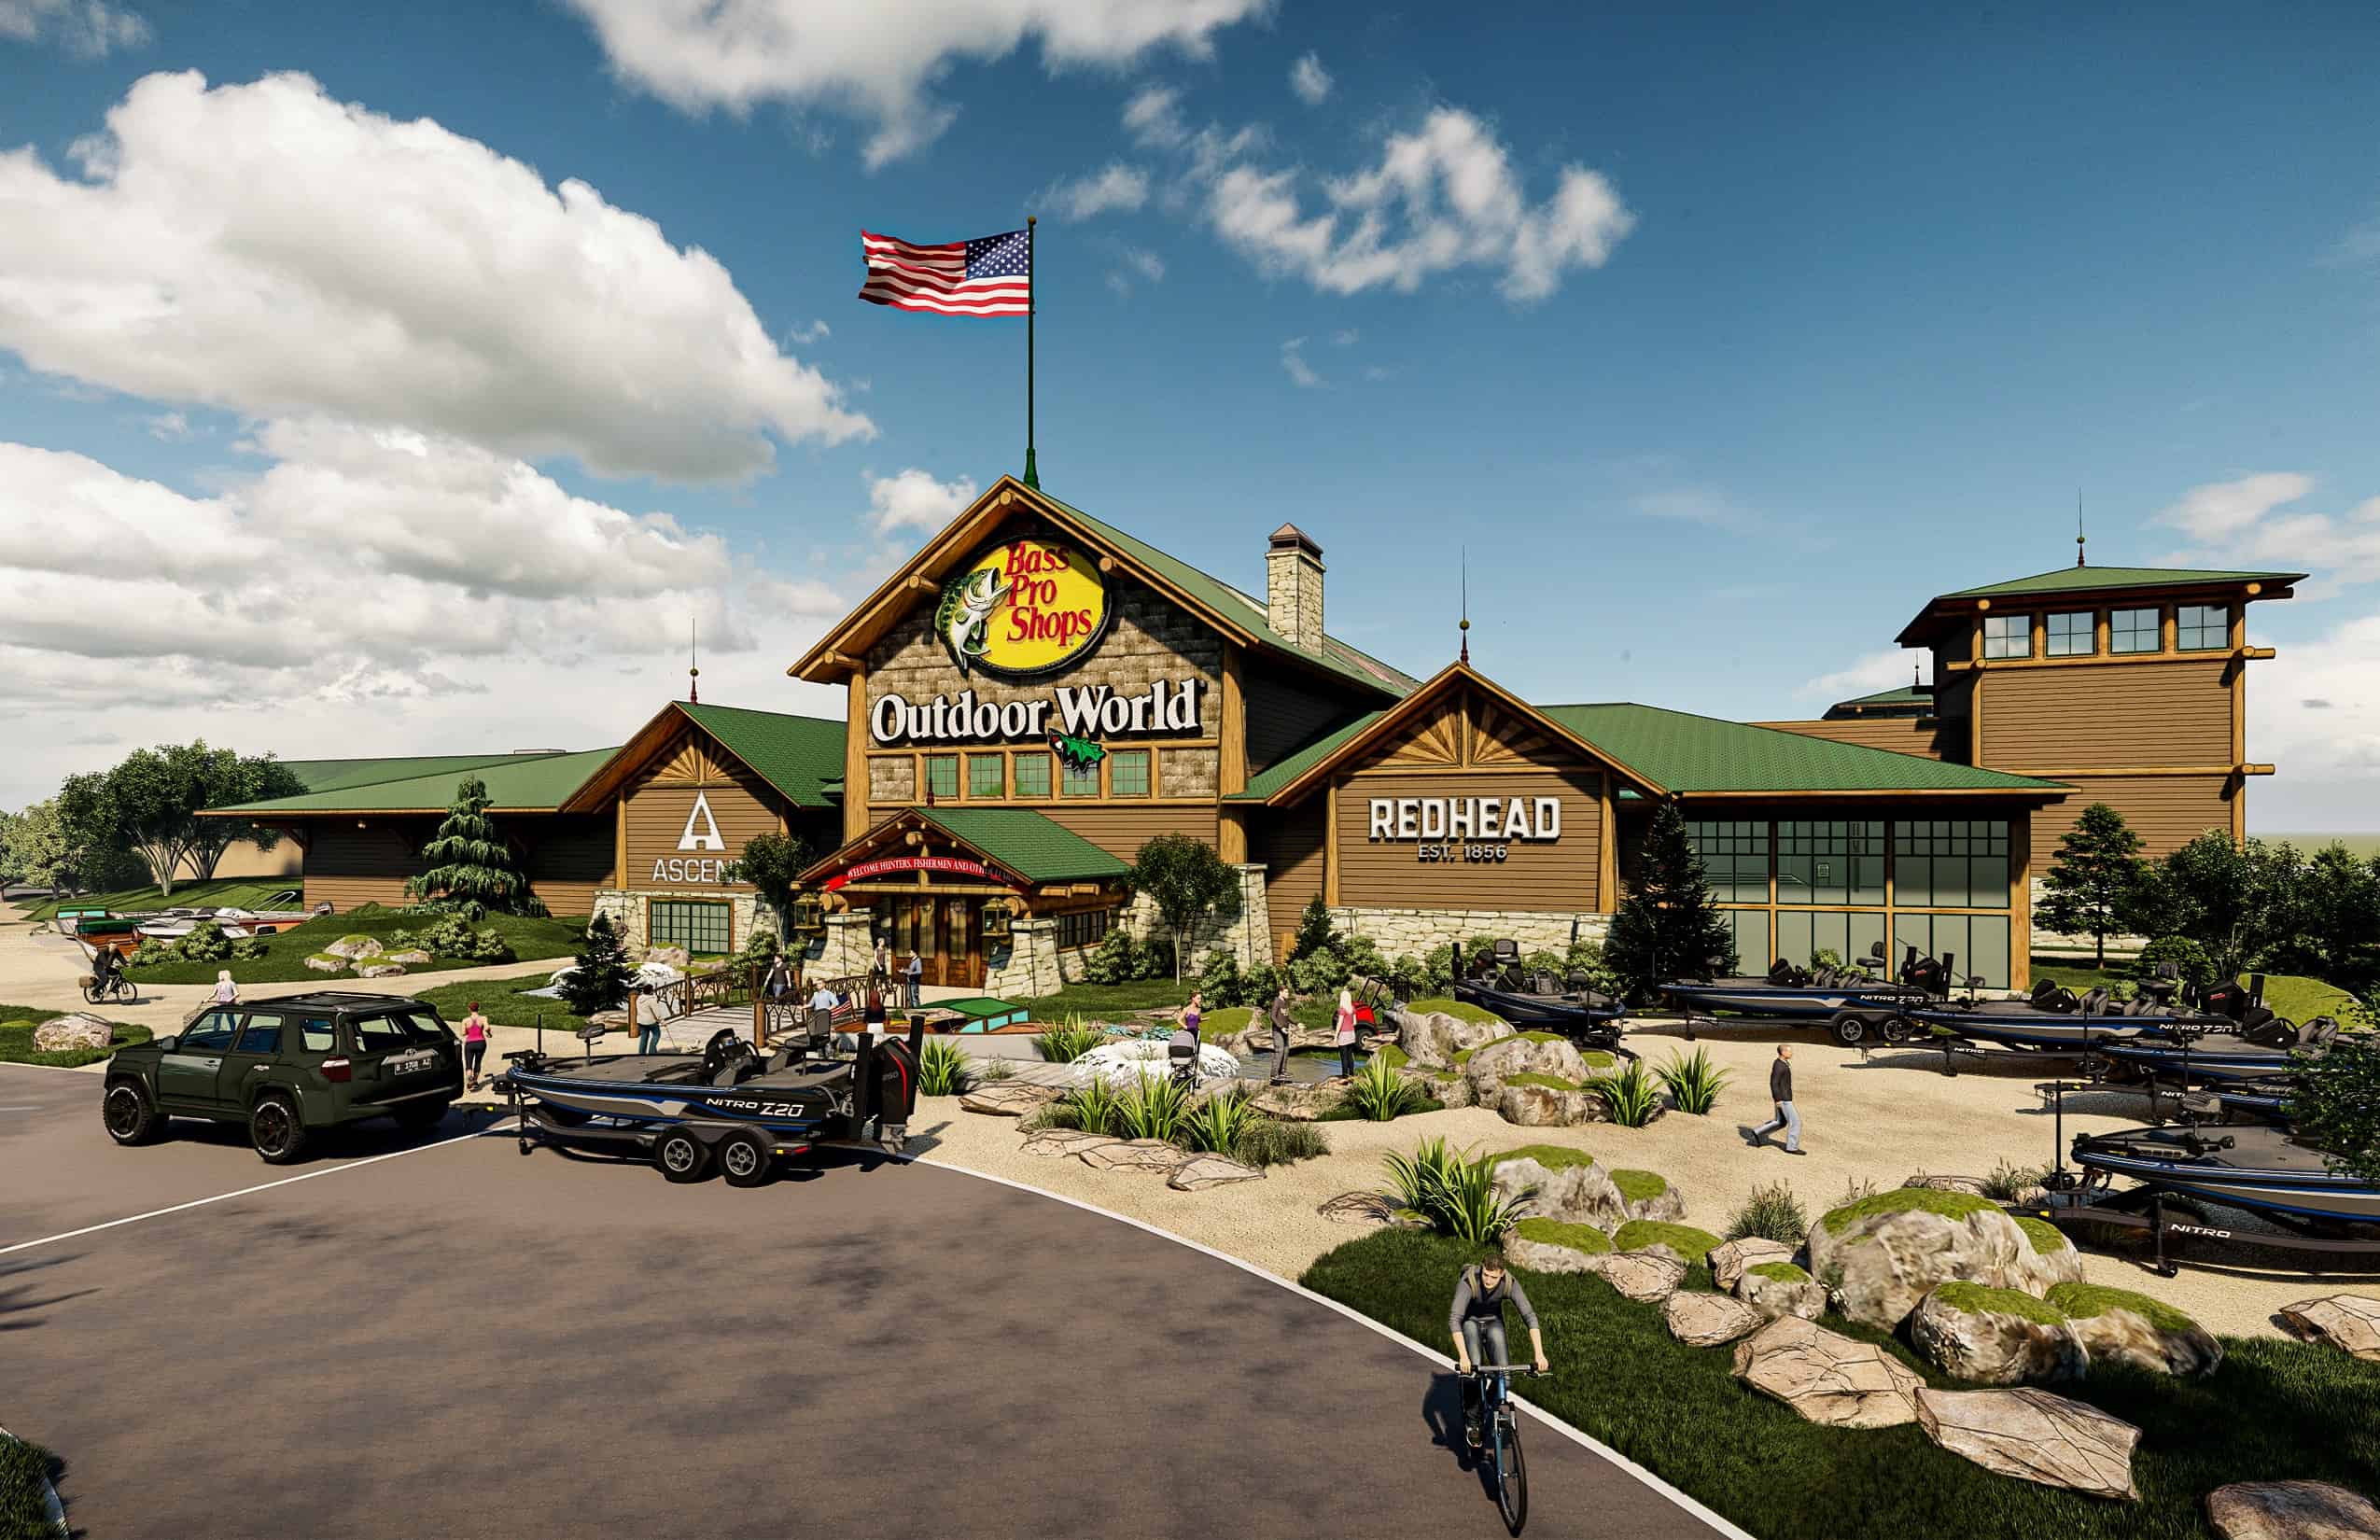 Bass Pro Shops announces February 21 Grand Opening for new mega